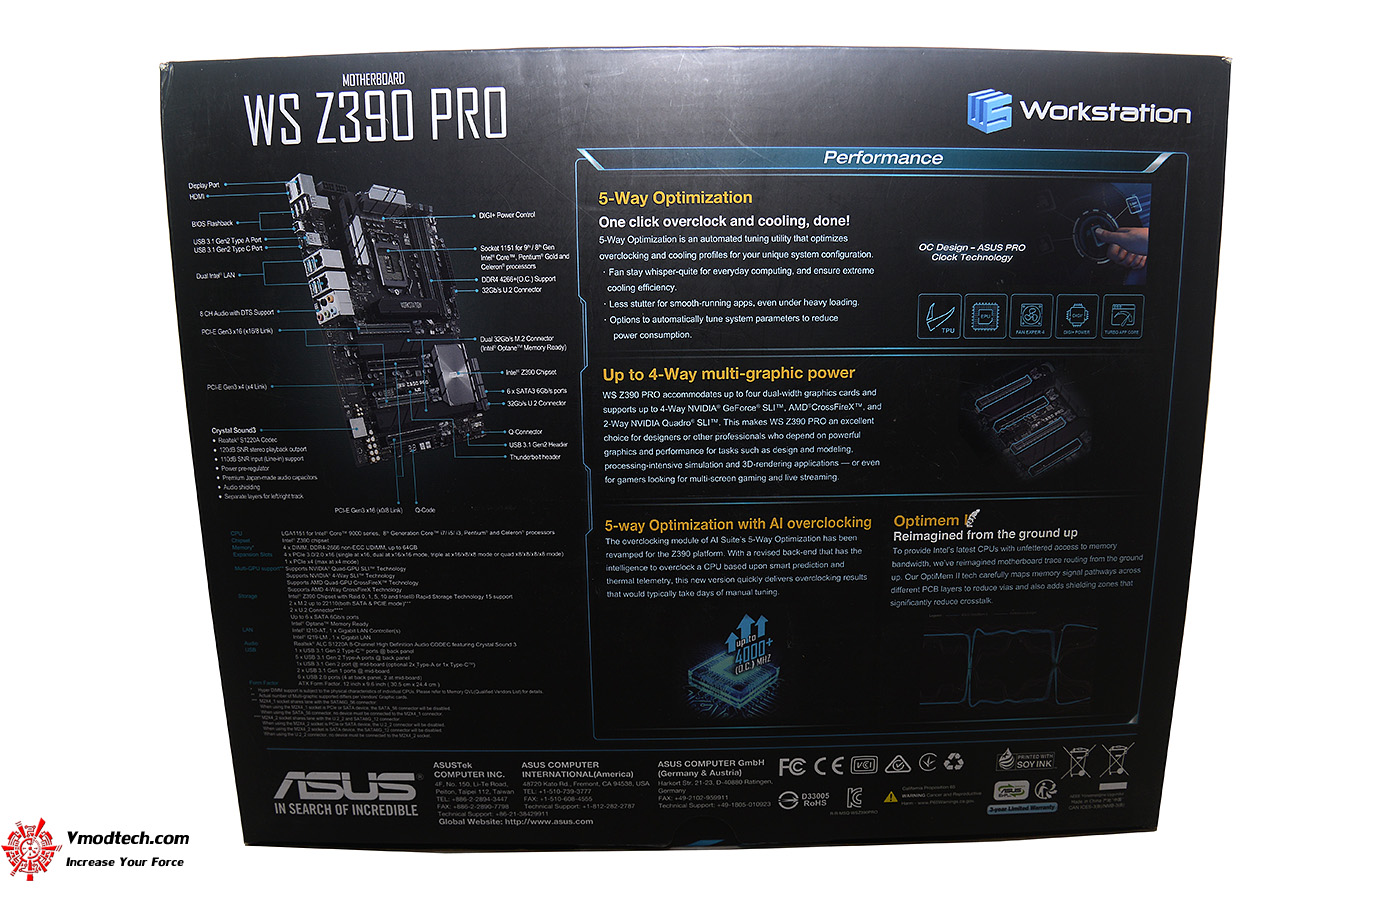 dsc 1263 ASUS WS Z390 PRO Servers & Workstations Motherboard Review